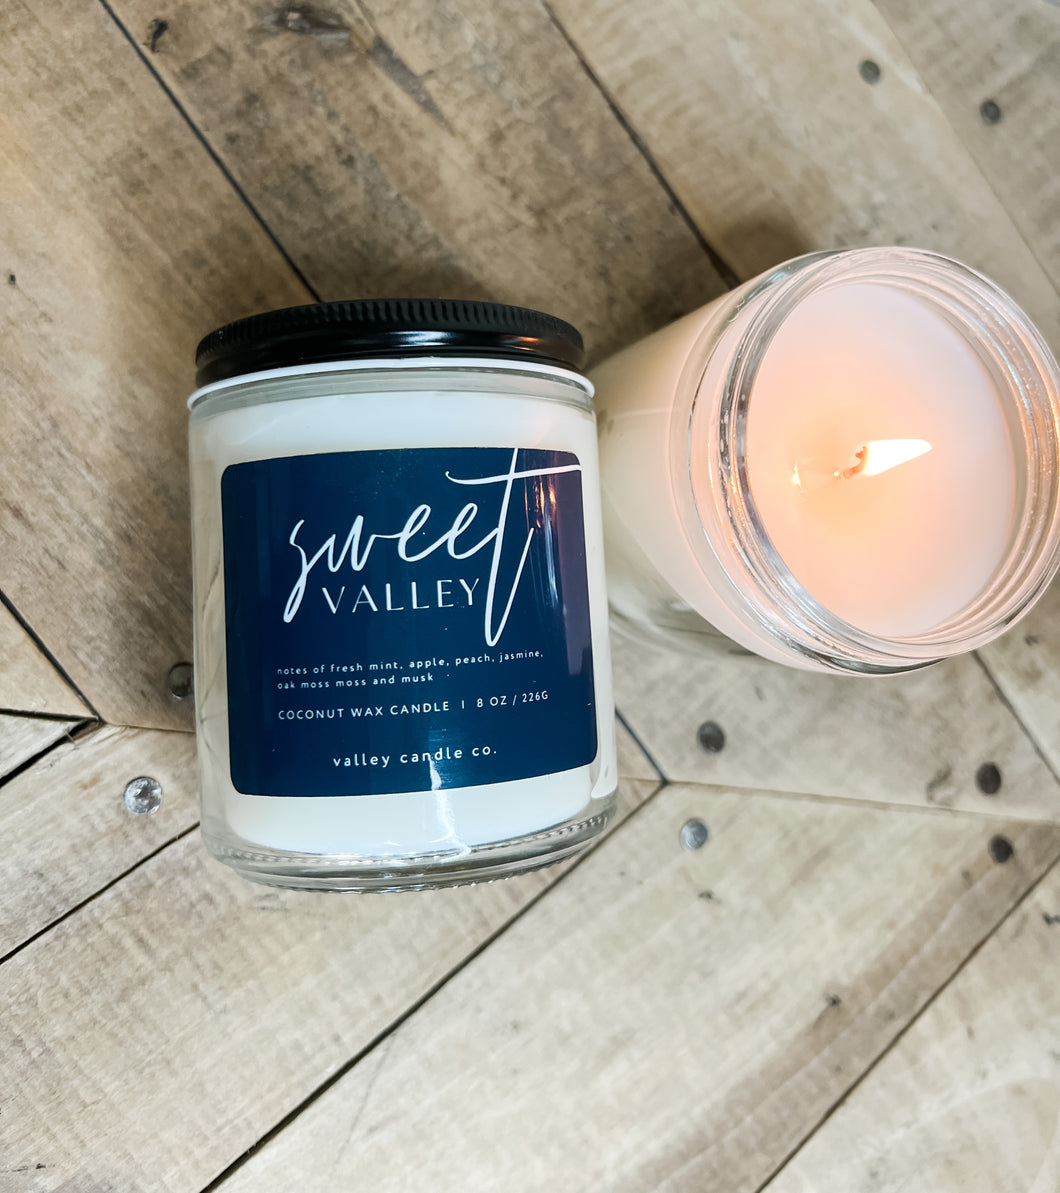 Sweet Valley | Coconut Wax Candle | 8 oz